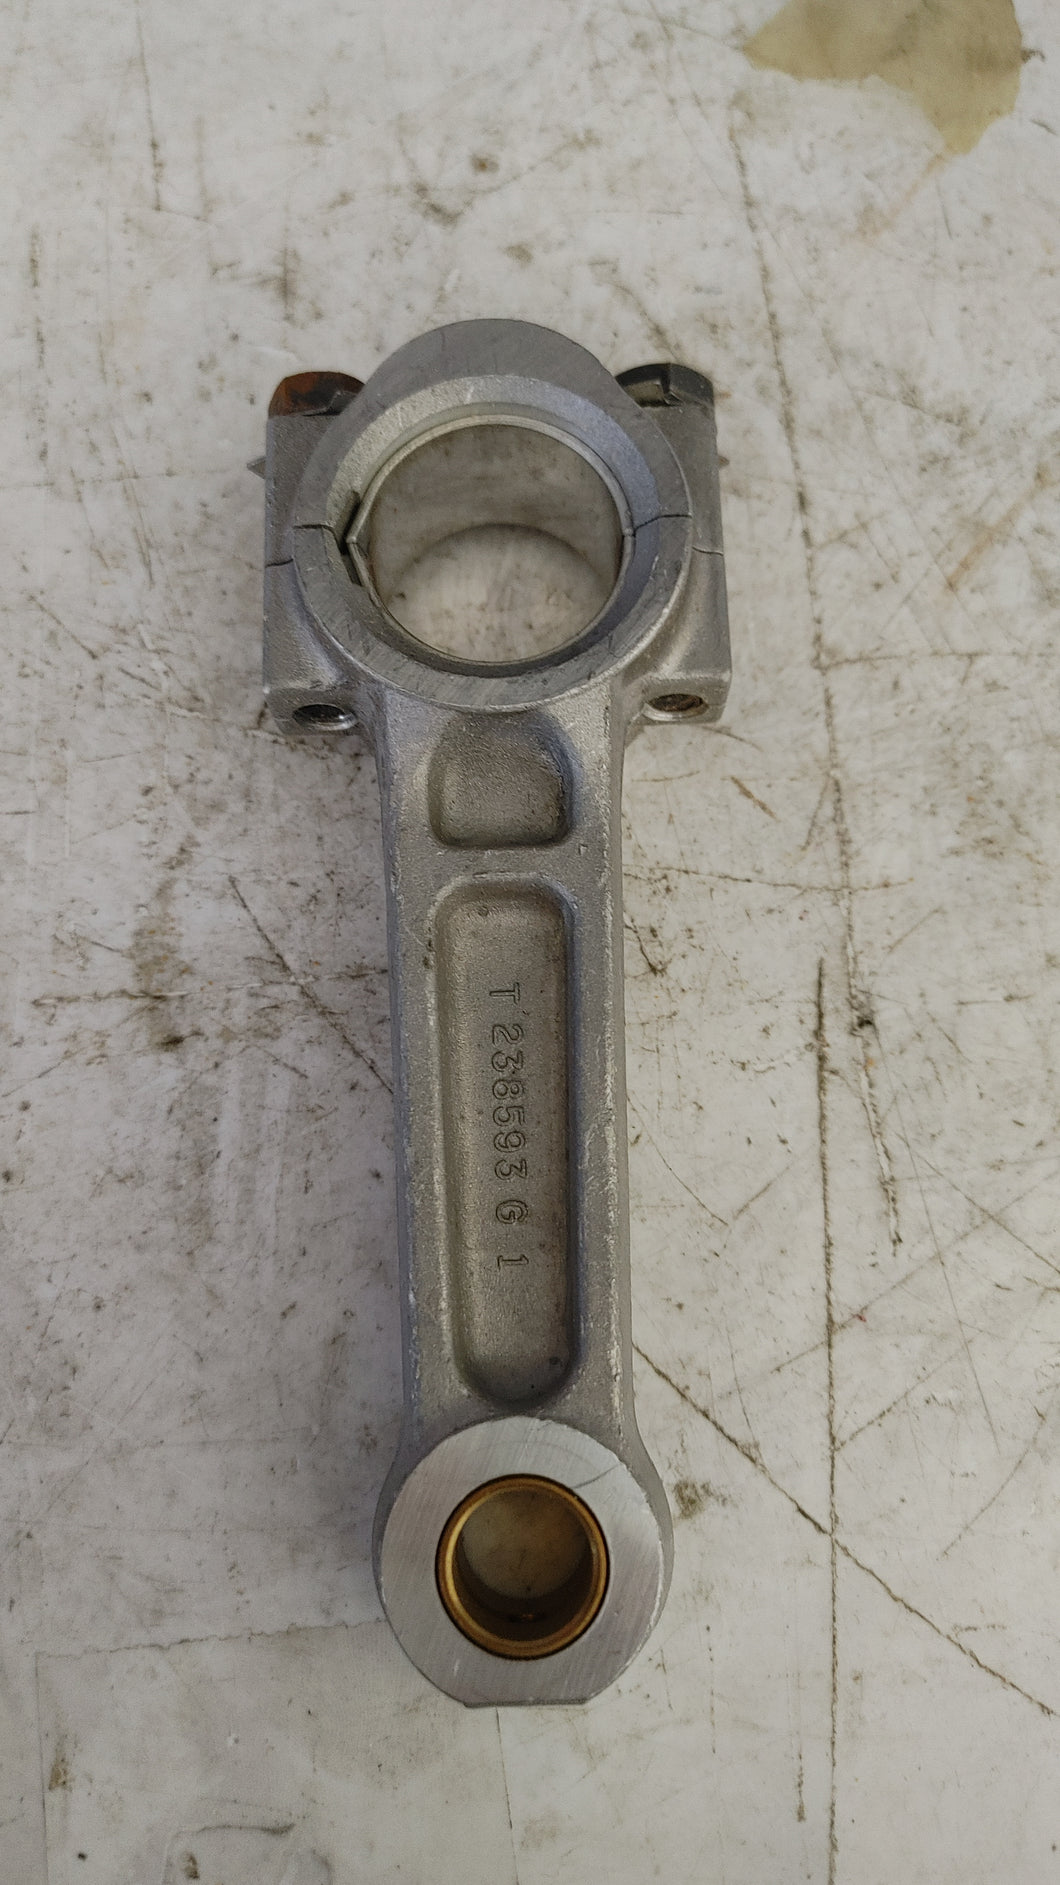 229084, 8S4646 - Bendix-Westing House - Connecting Rod for 621B wheel tractor air inlet and exhaust system